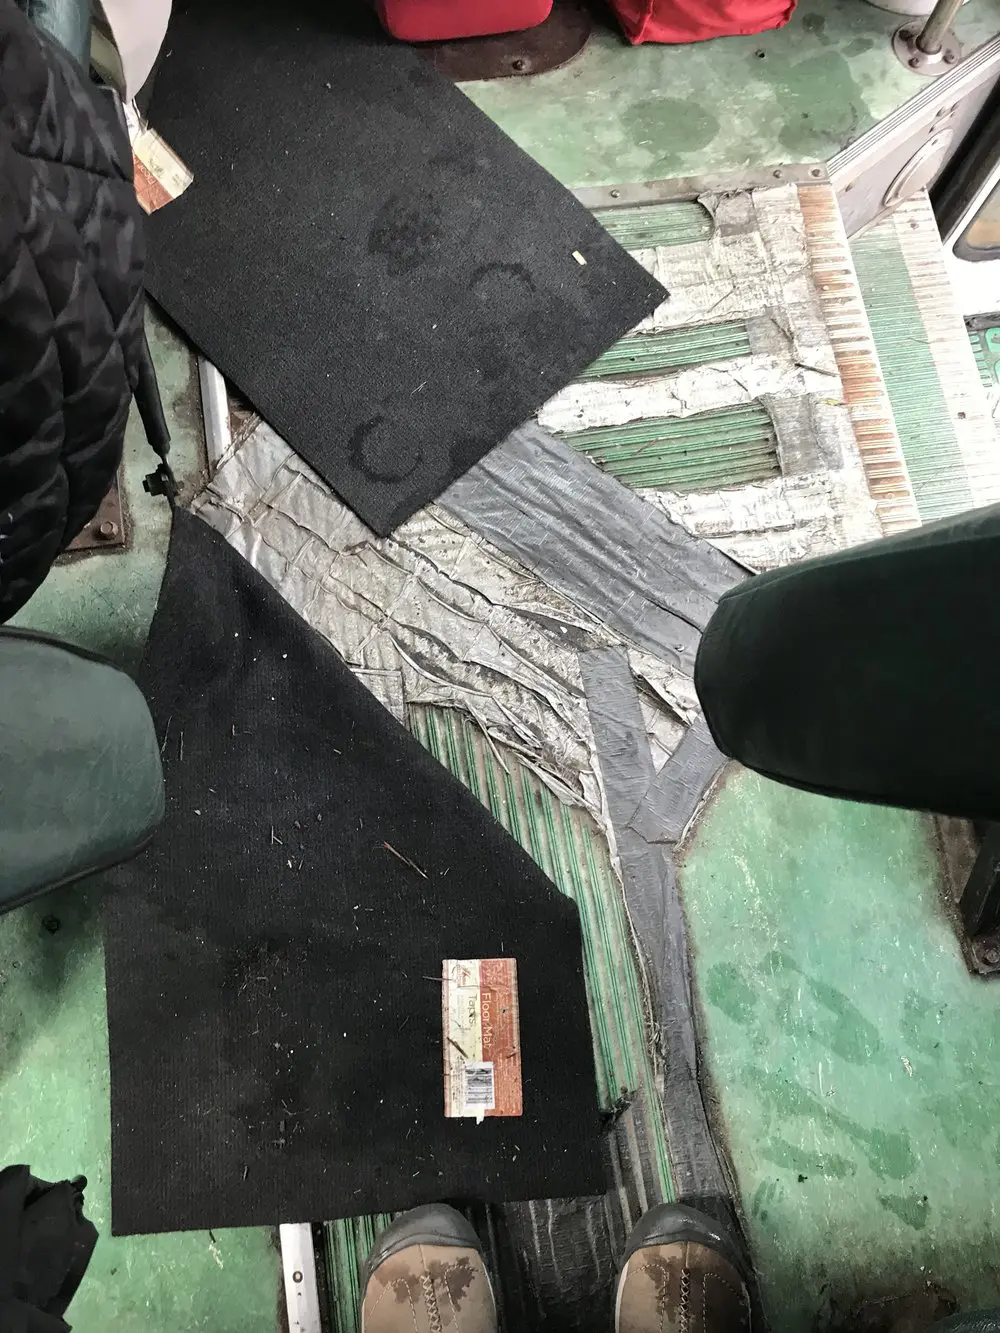 Here’s the floor of the aisle, if you can even call it a floor. Parts under the rubber mat and duct tape were rusted through.